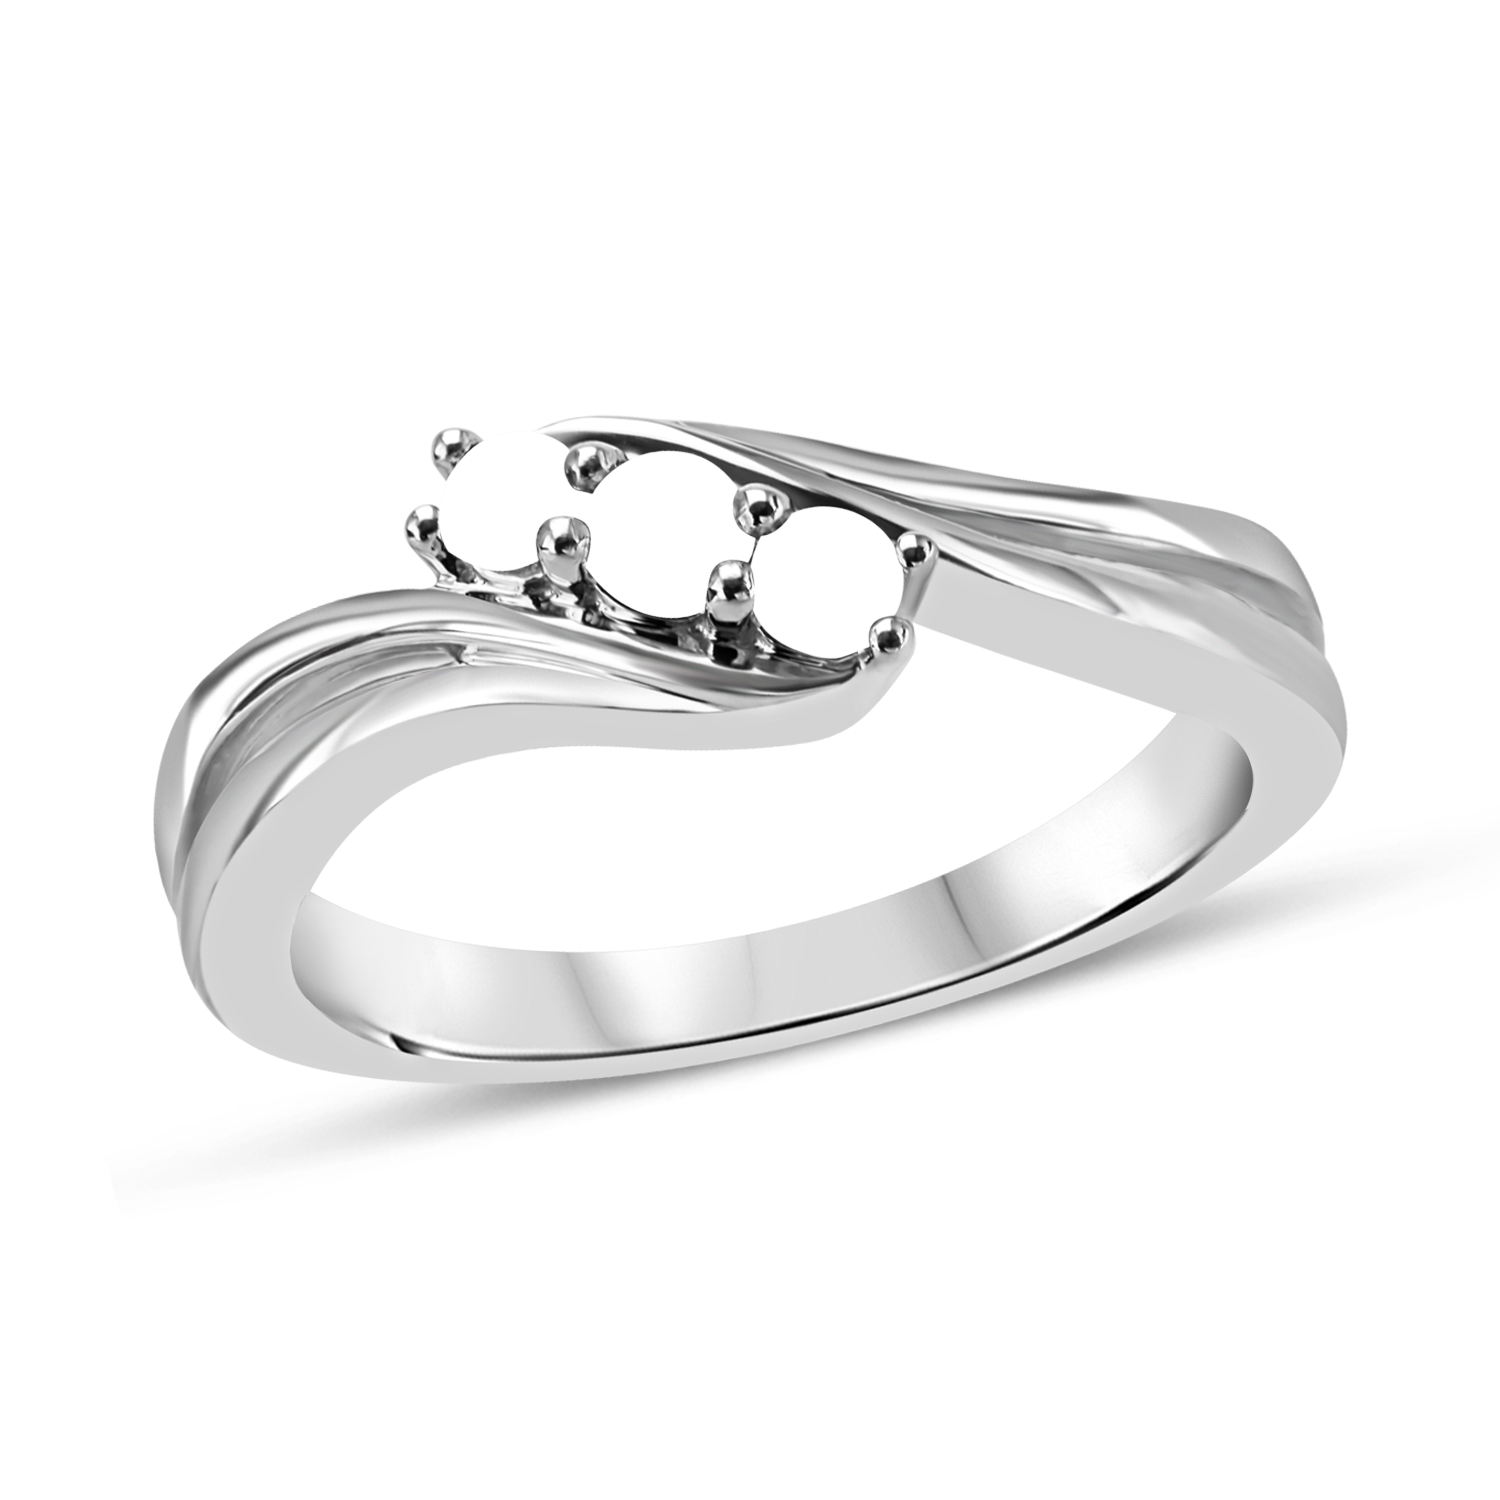 Aokarry Ladies Jewelry 925 Sterling Silver Mothers Ring Engraved Princess & Round White Cubic Zirconia Size 5-12s